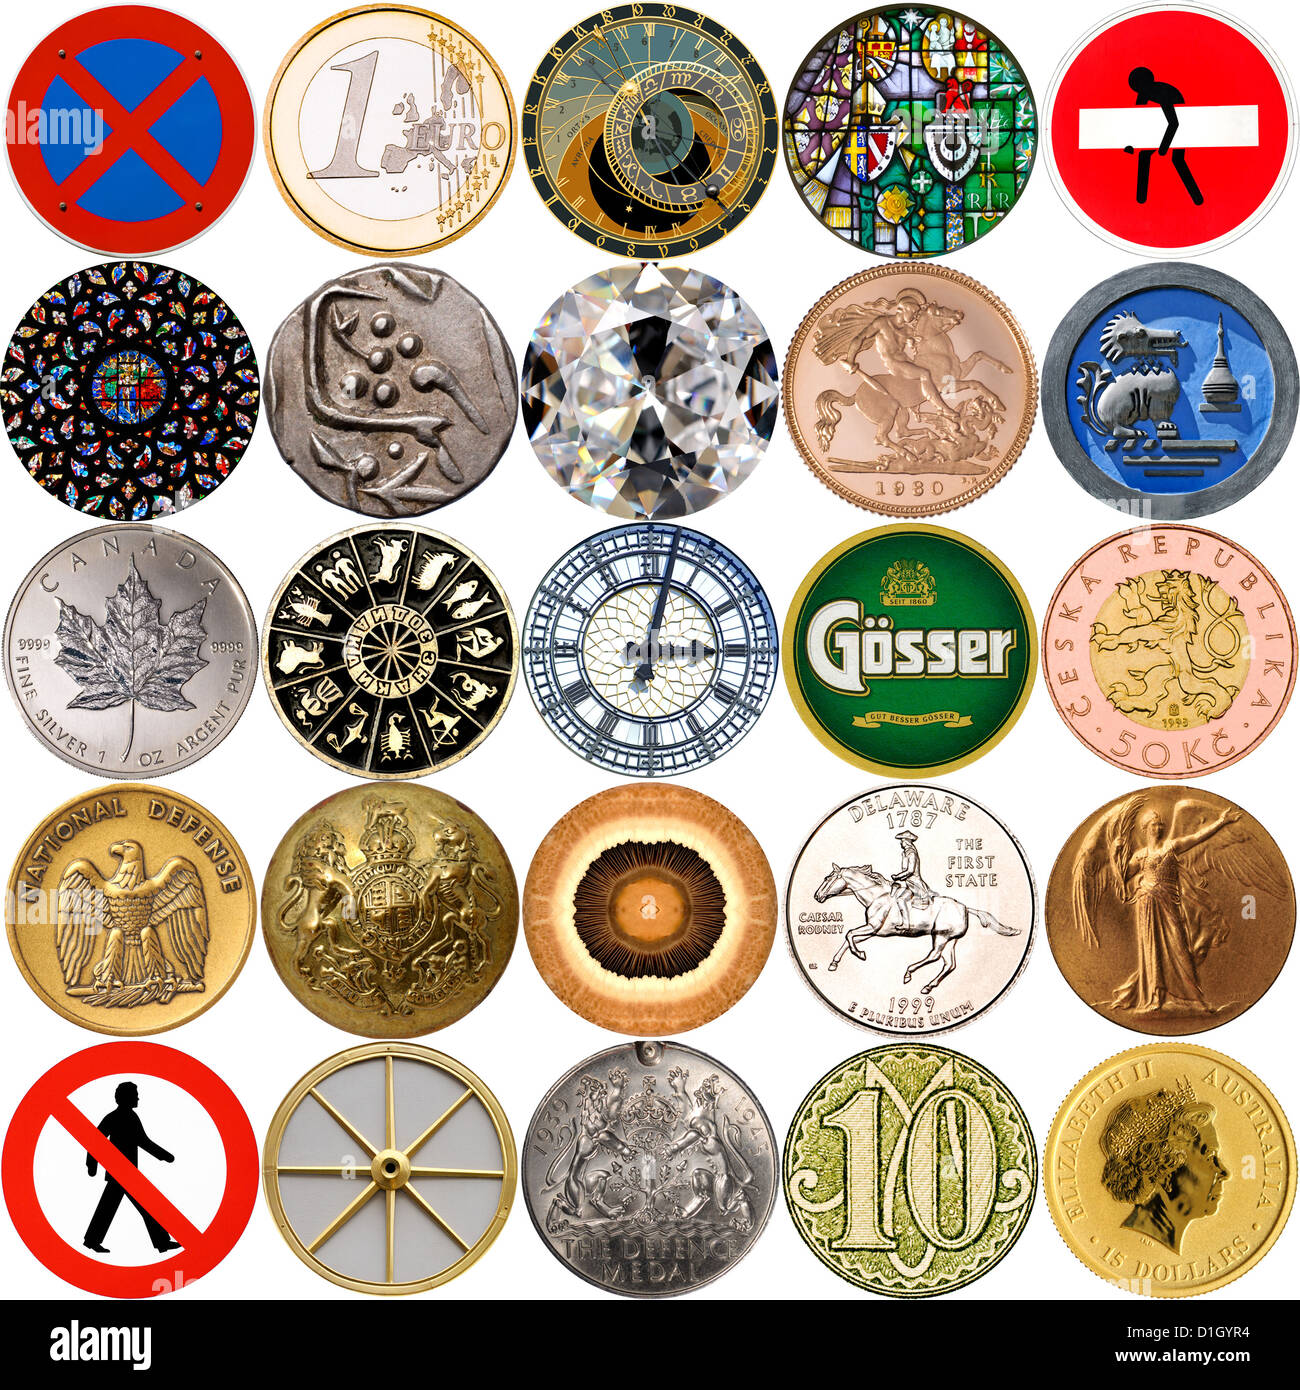 Circular objects - coins, medals, road signs etc. Stock Photo